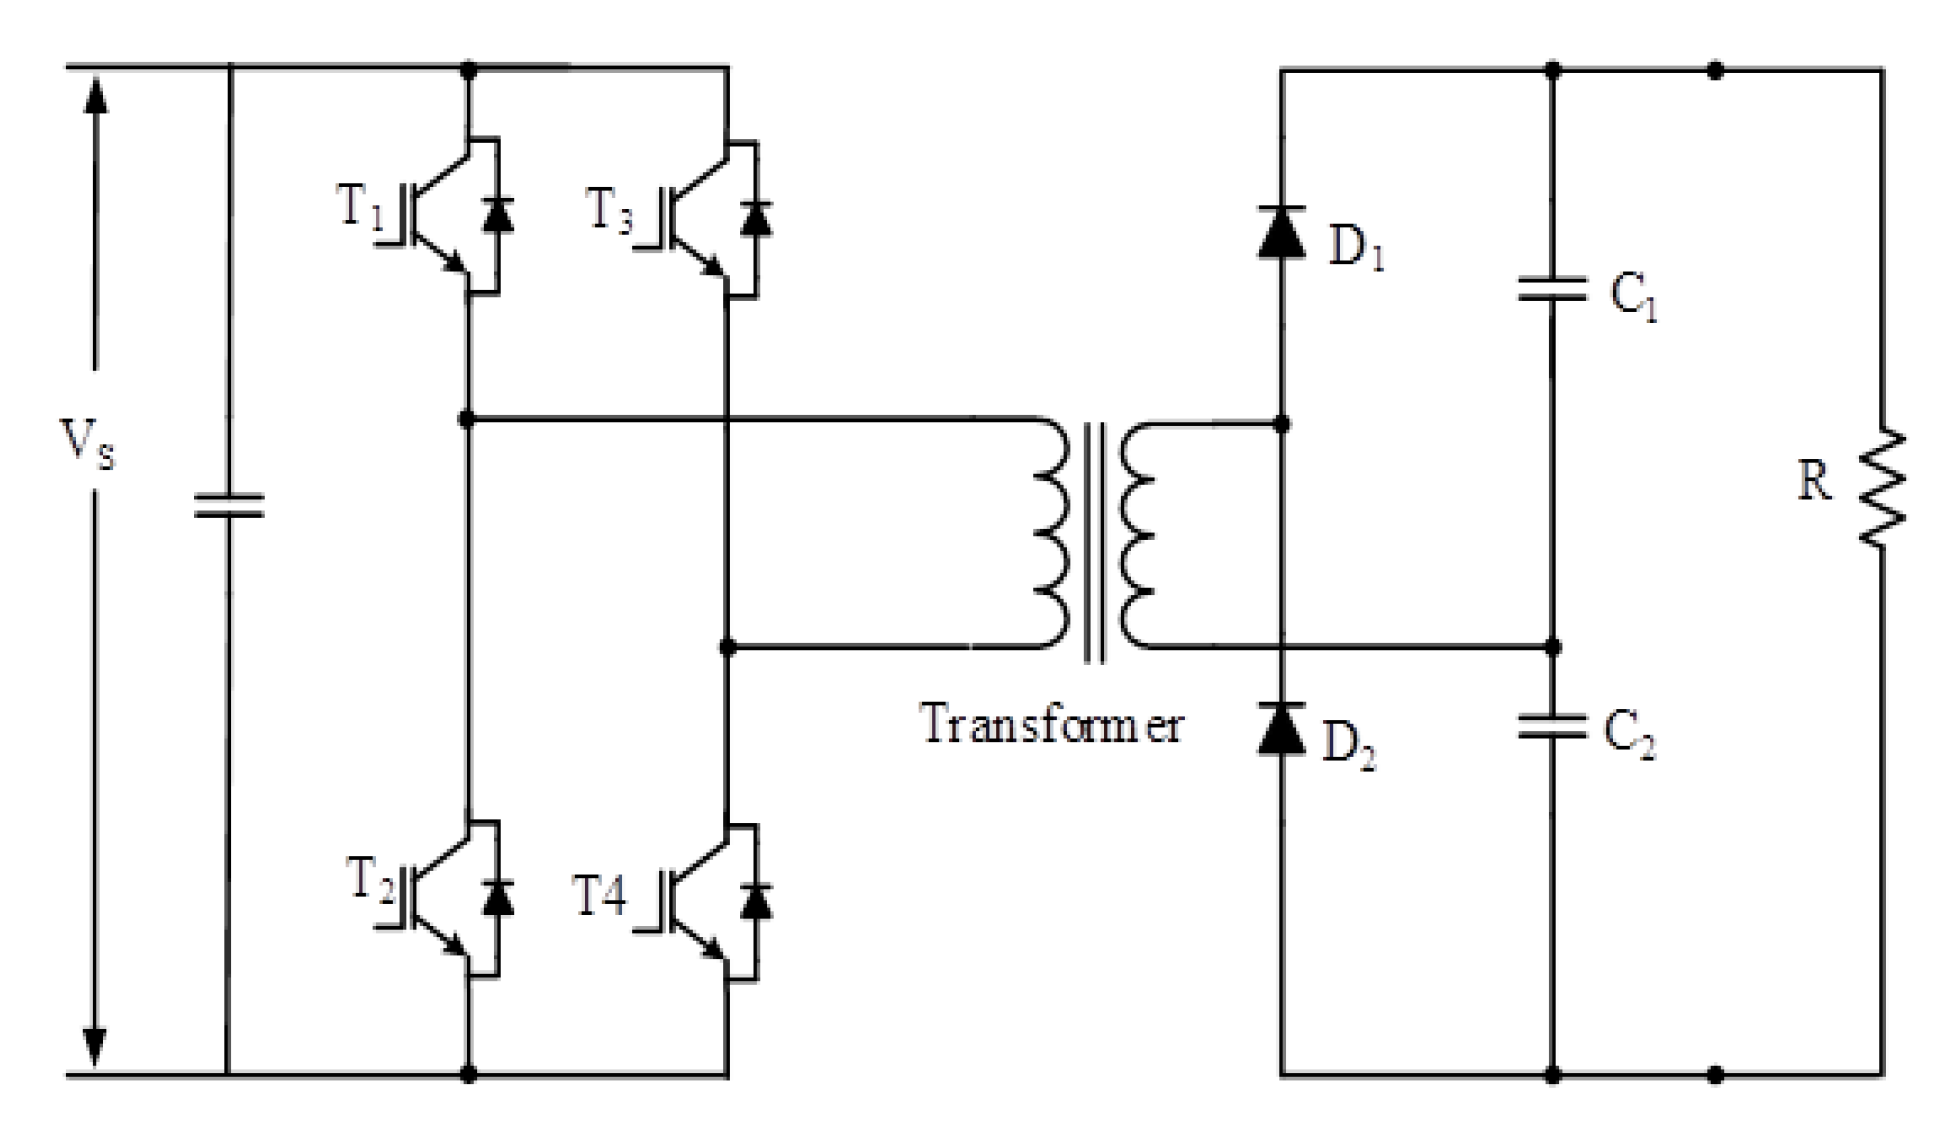 Schematic of the Isolated Full Bridge Boost converter.